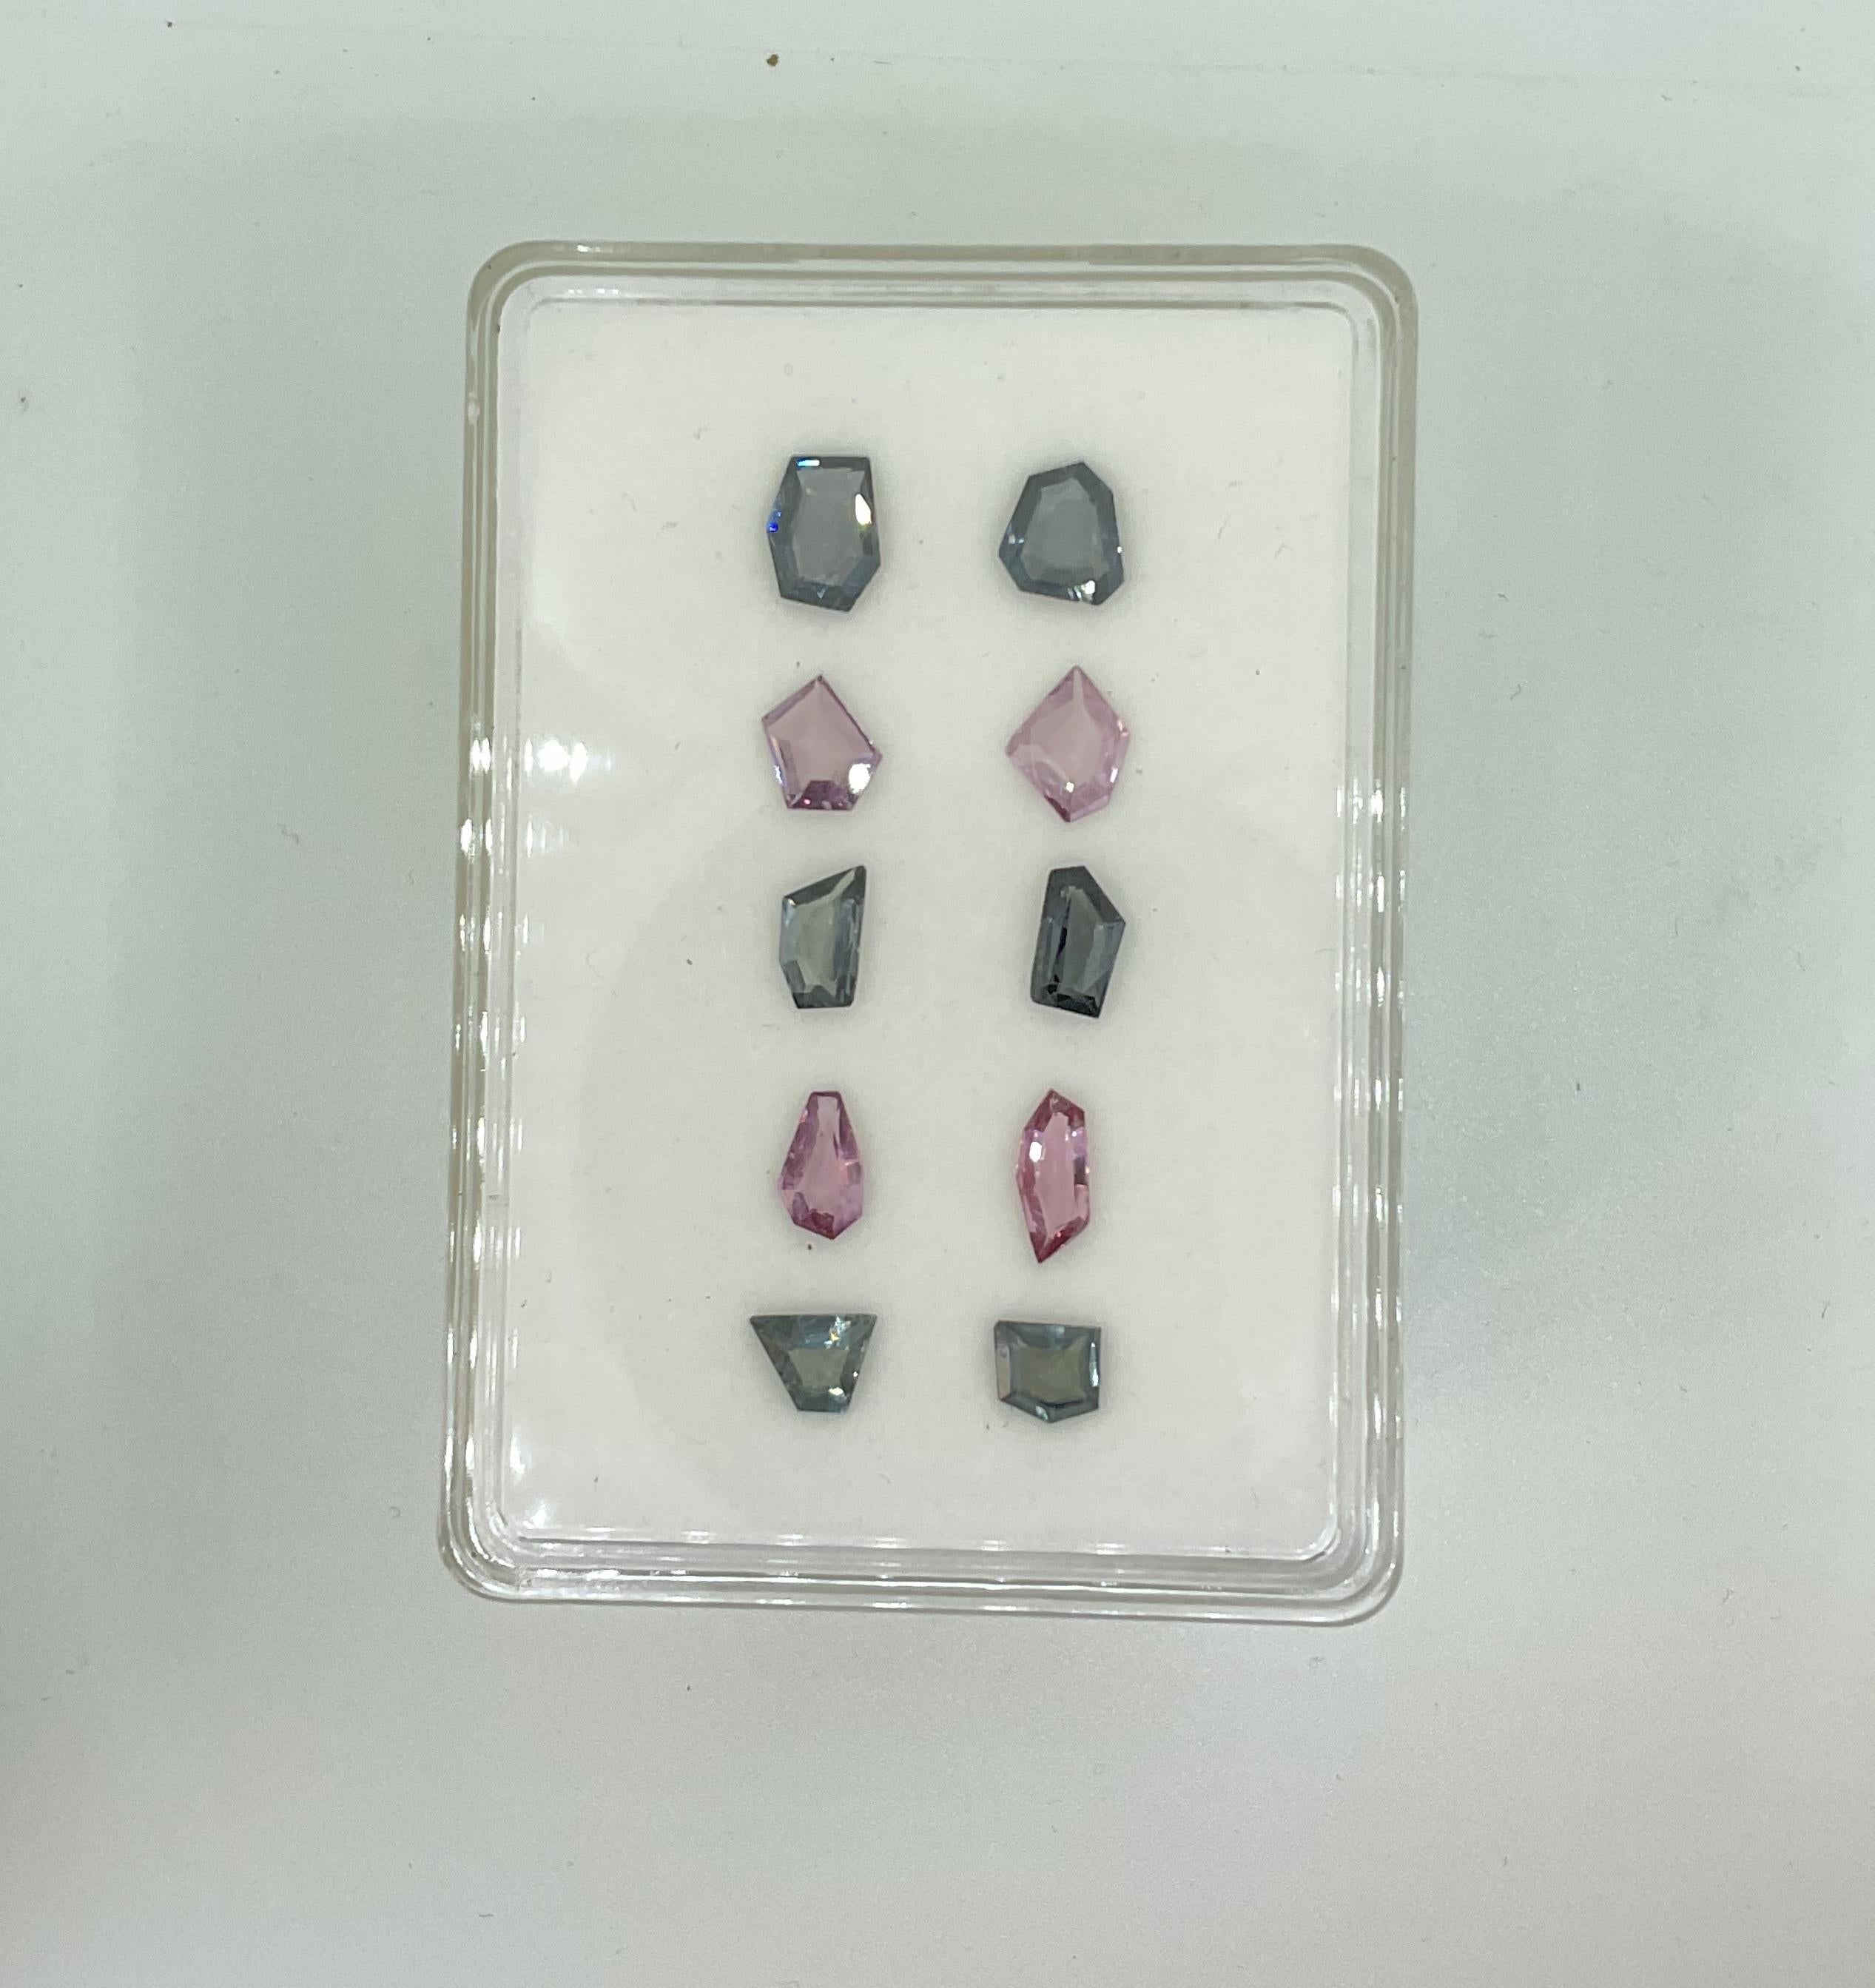 12.35 Carats Grey & Pink Spinel Fancy Cut Stone Natural Gem For Top Fine Jewelry

Gemstone: Spinel
Weight: 12.35 Carats
Size: 4x6 To 11x8 MM
Pieces: 10
Shape: Fancy Cut stones